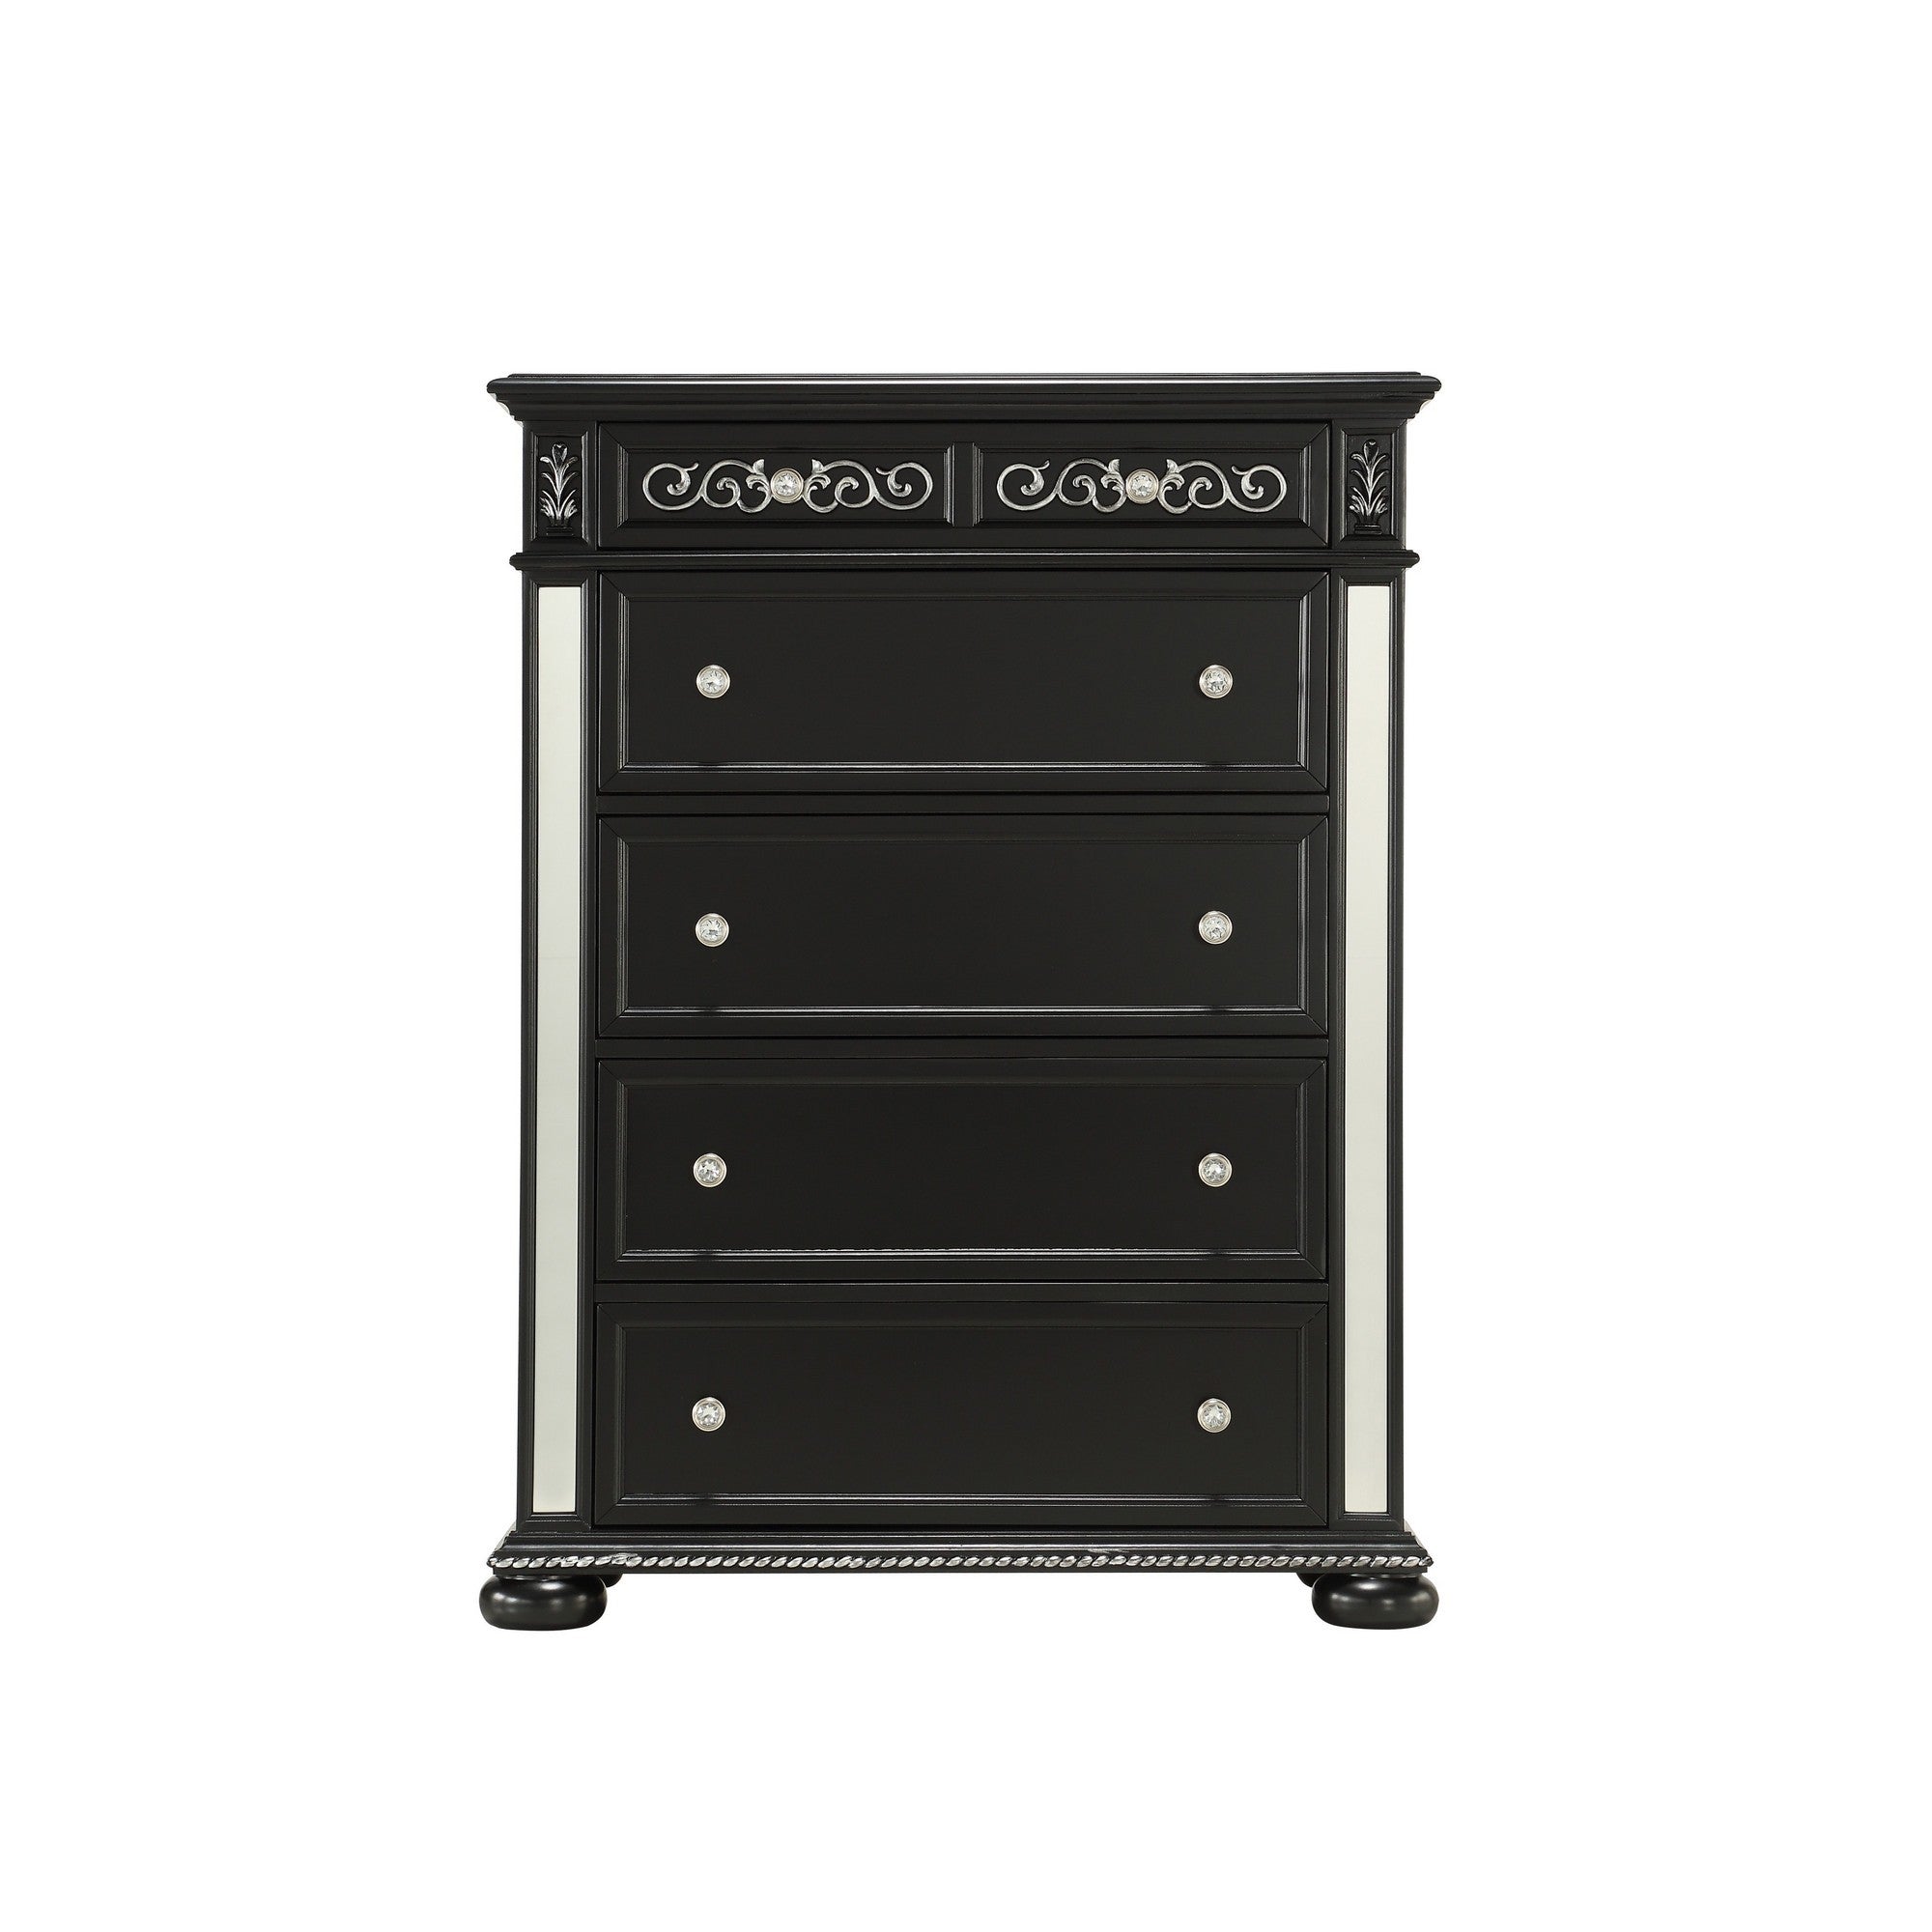 Black Jewel Heirloom Appearance Chest with Intricate Carvings  Mirrored Accents  9 Drawer Default Title